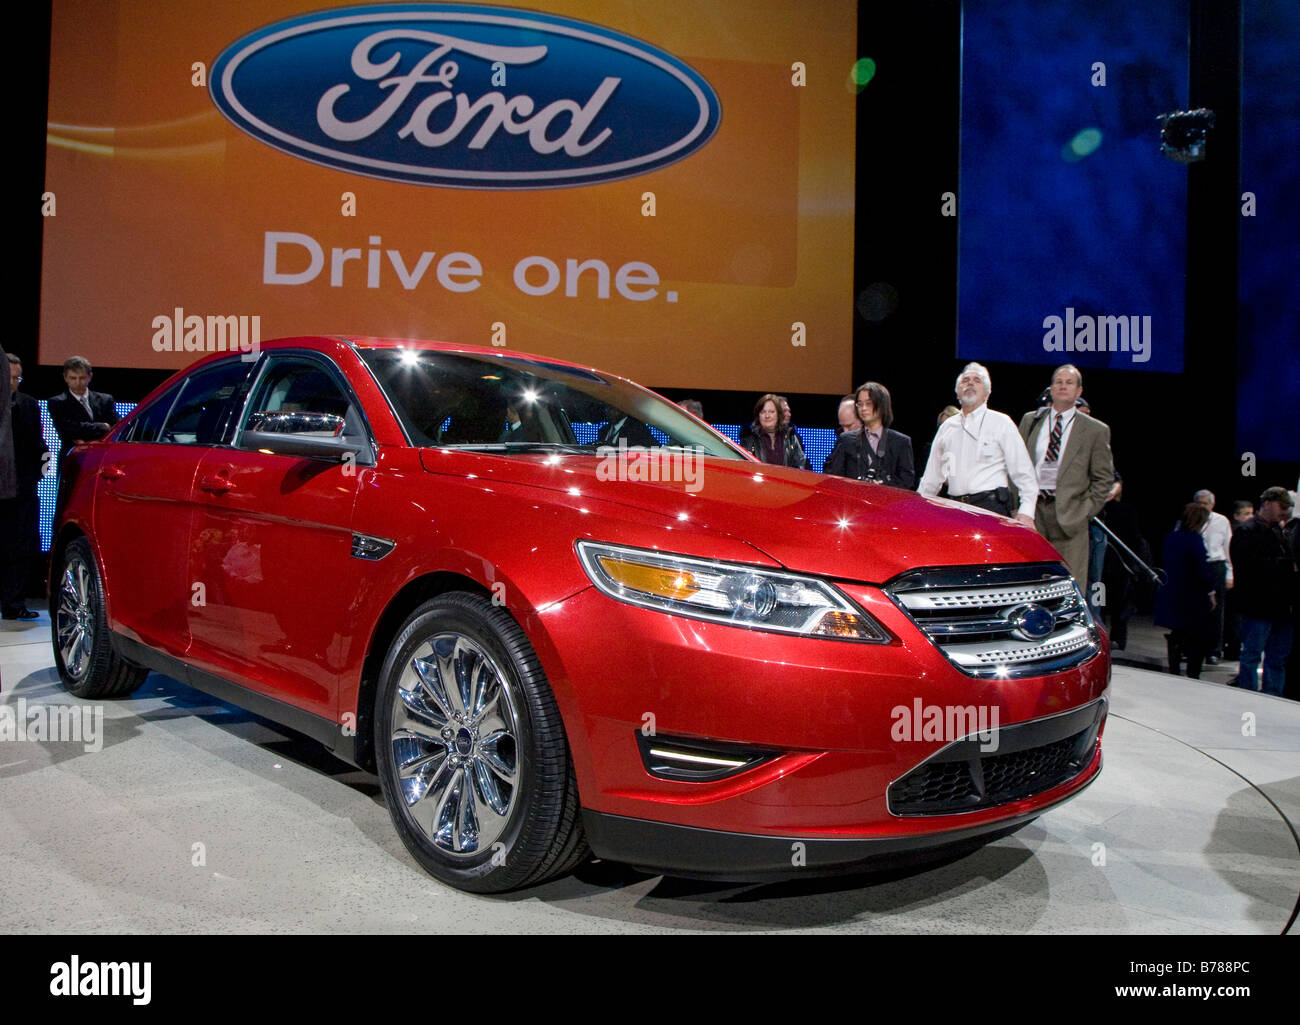 Detroit Michigan The Ford Taurus on display at the North American International Auto Show Stock Photo